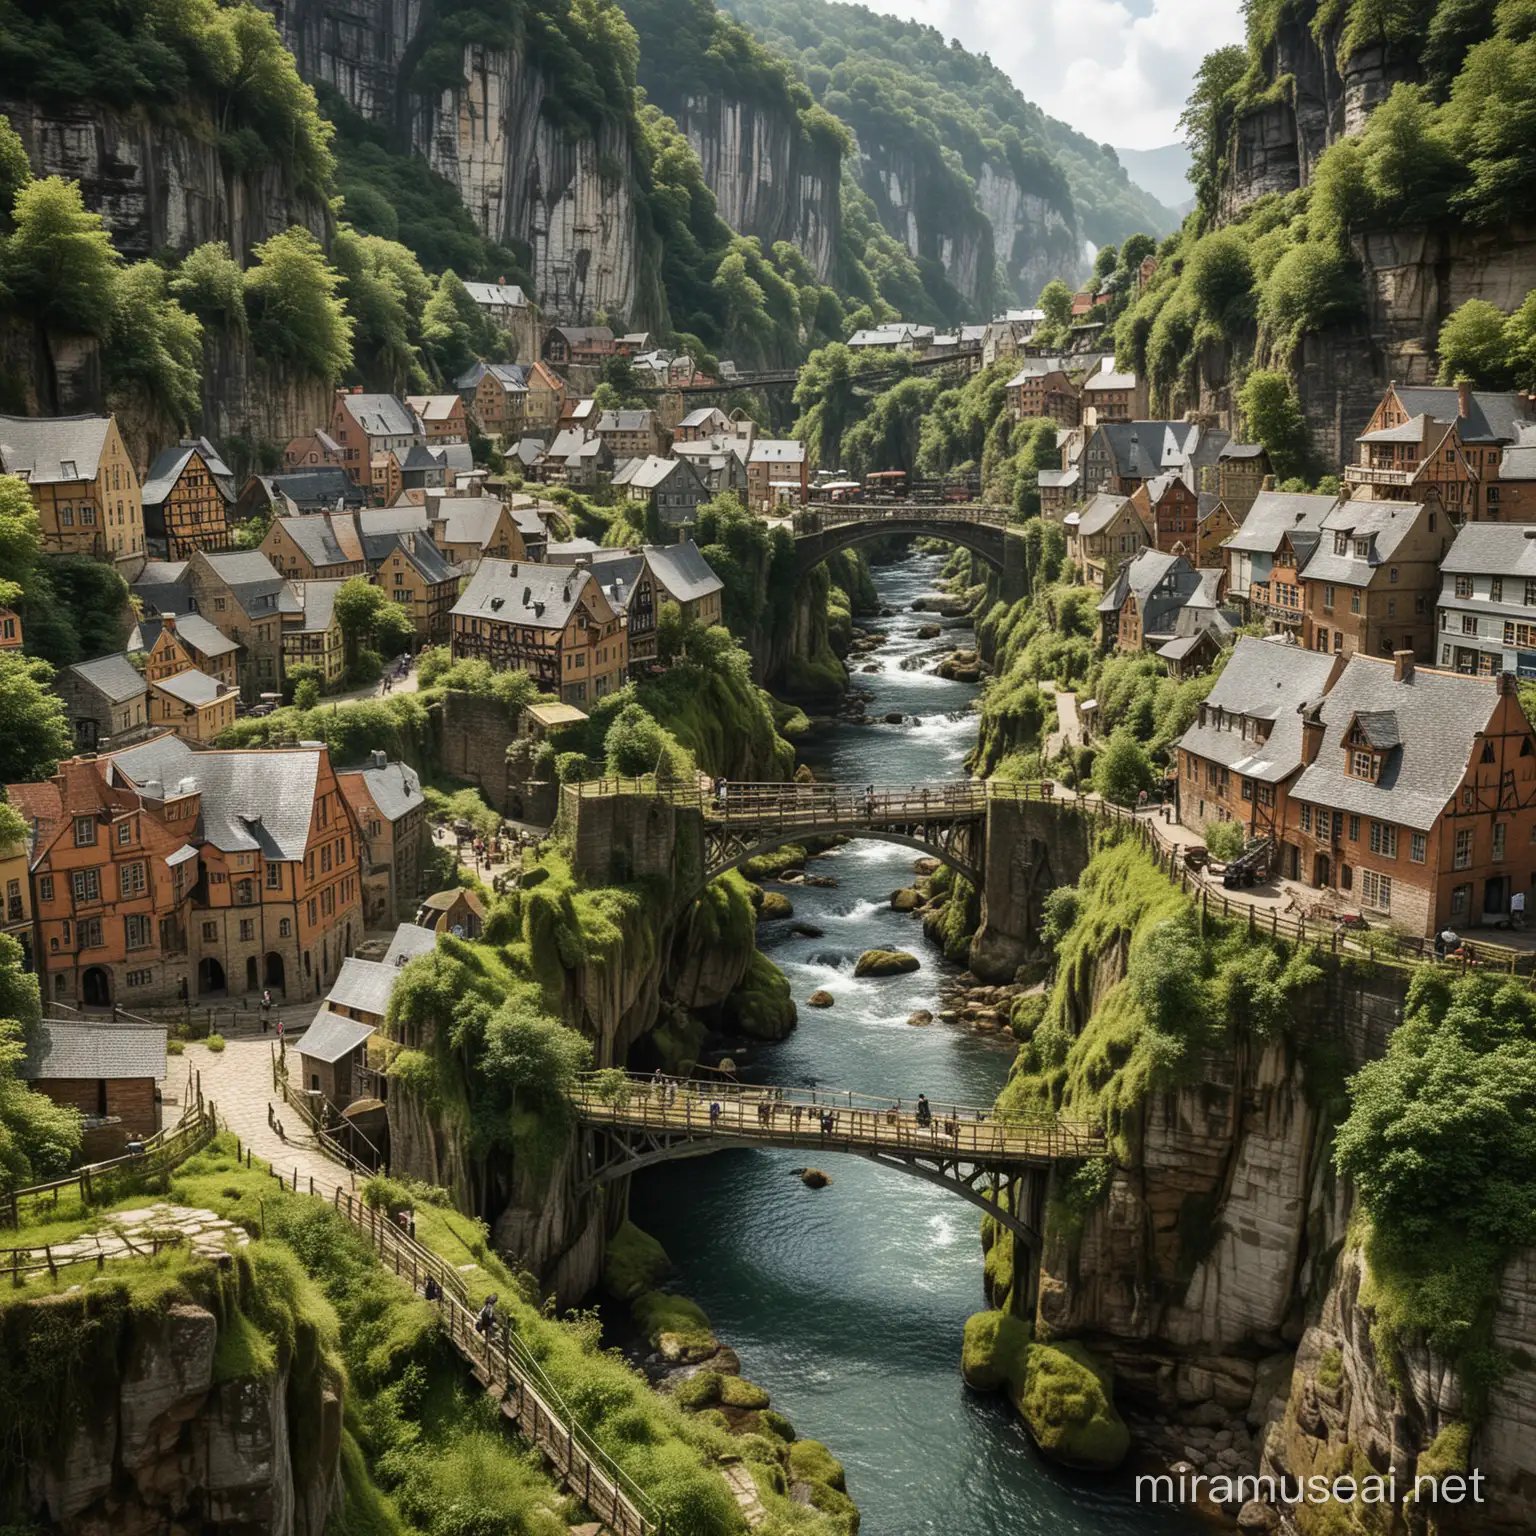 Town in a forest, has many bridges over rivers and streams as well as bridges connecting different parts of the town which is separate by cliffs, the town is built from bricks and has moss growing on the buildings